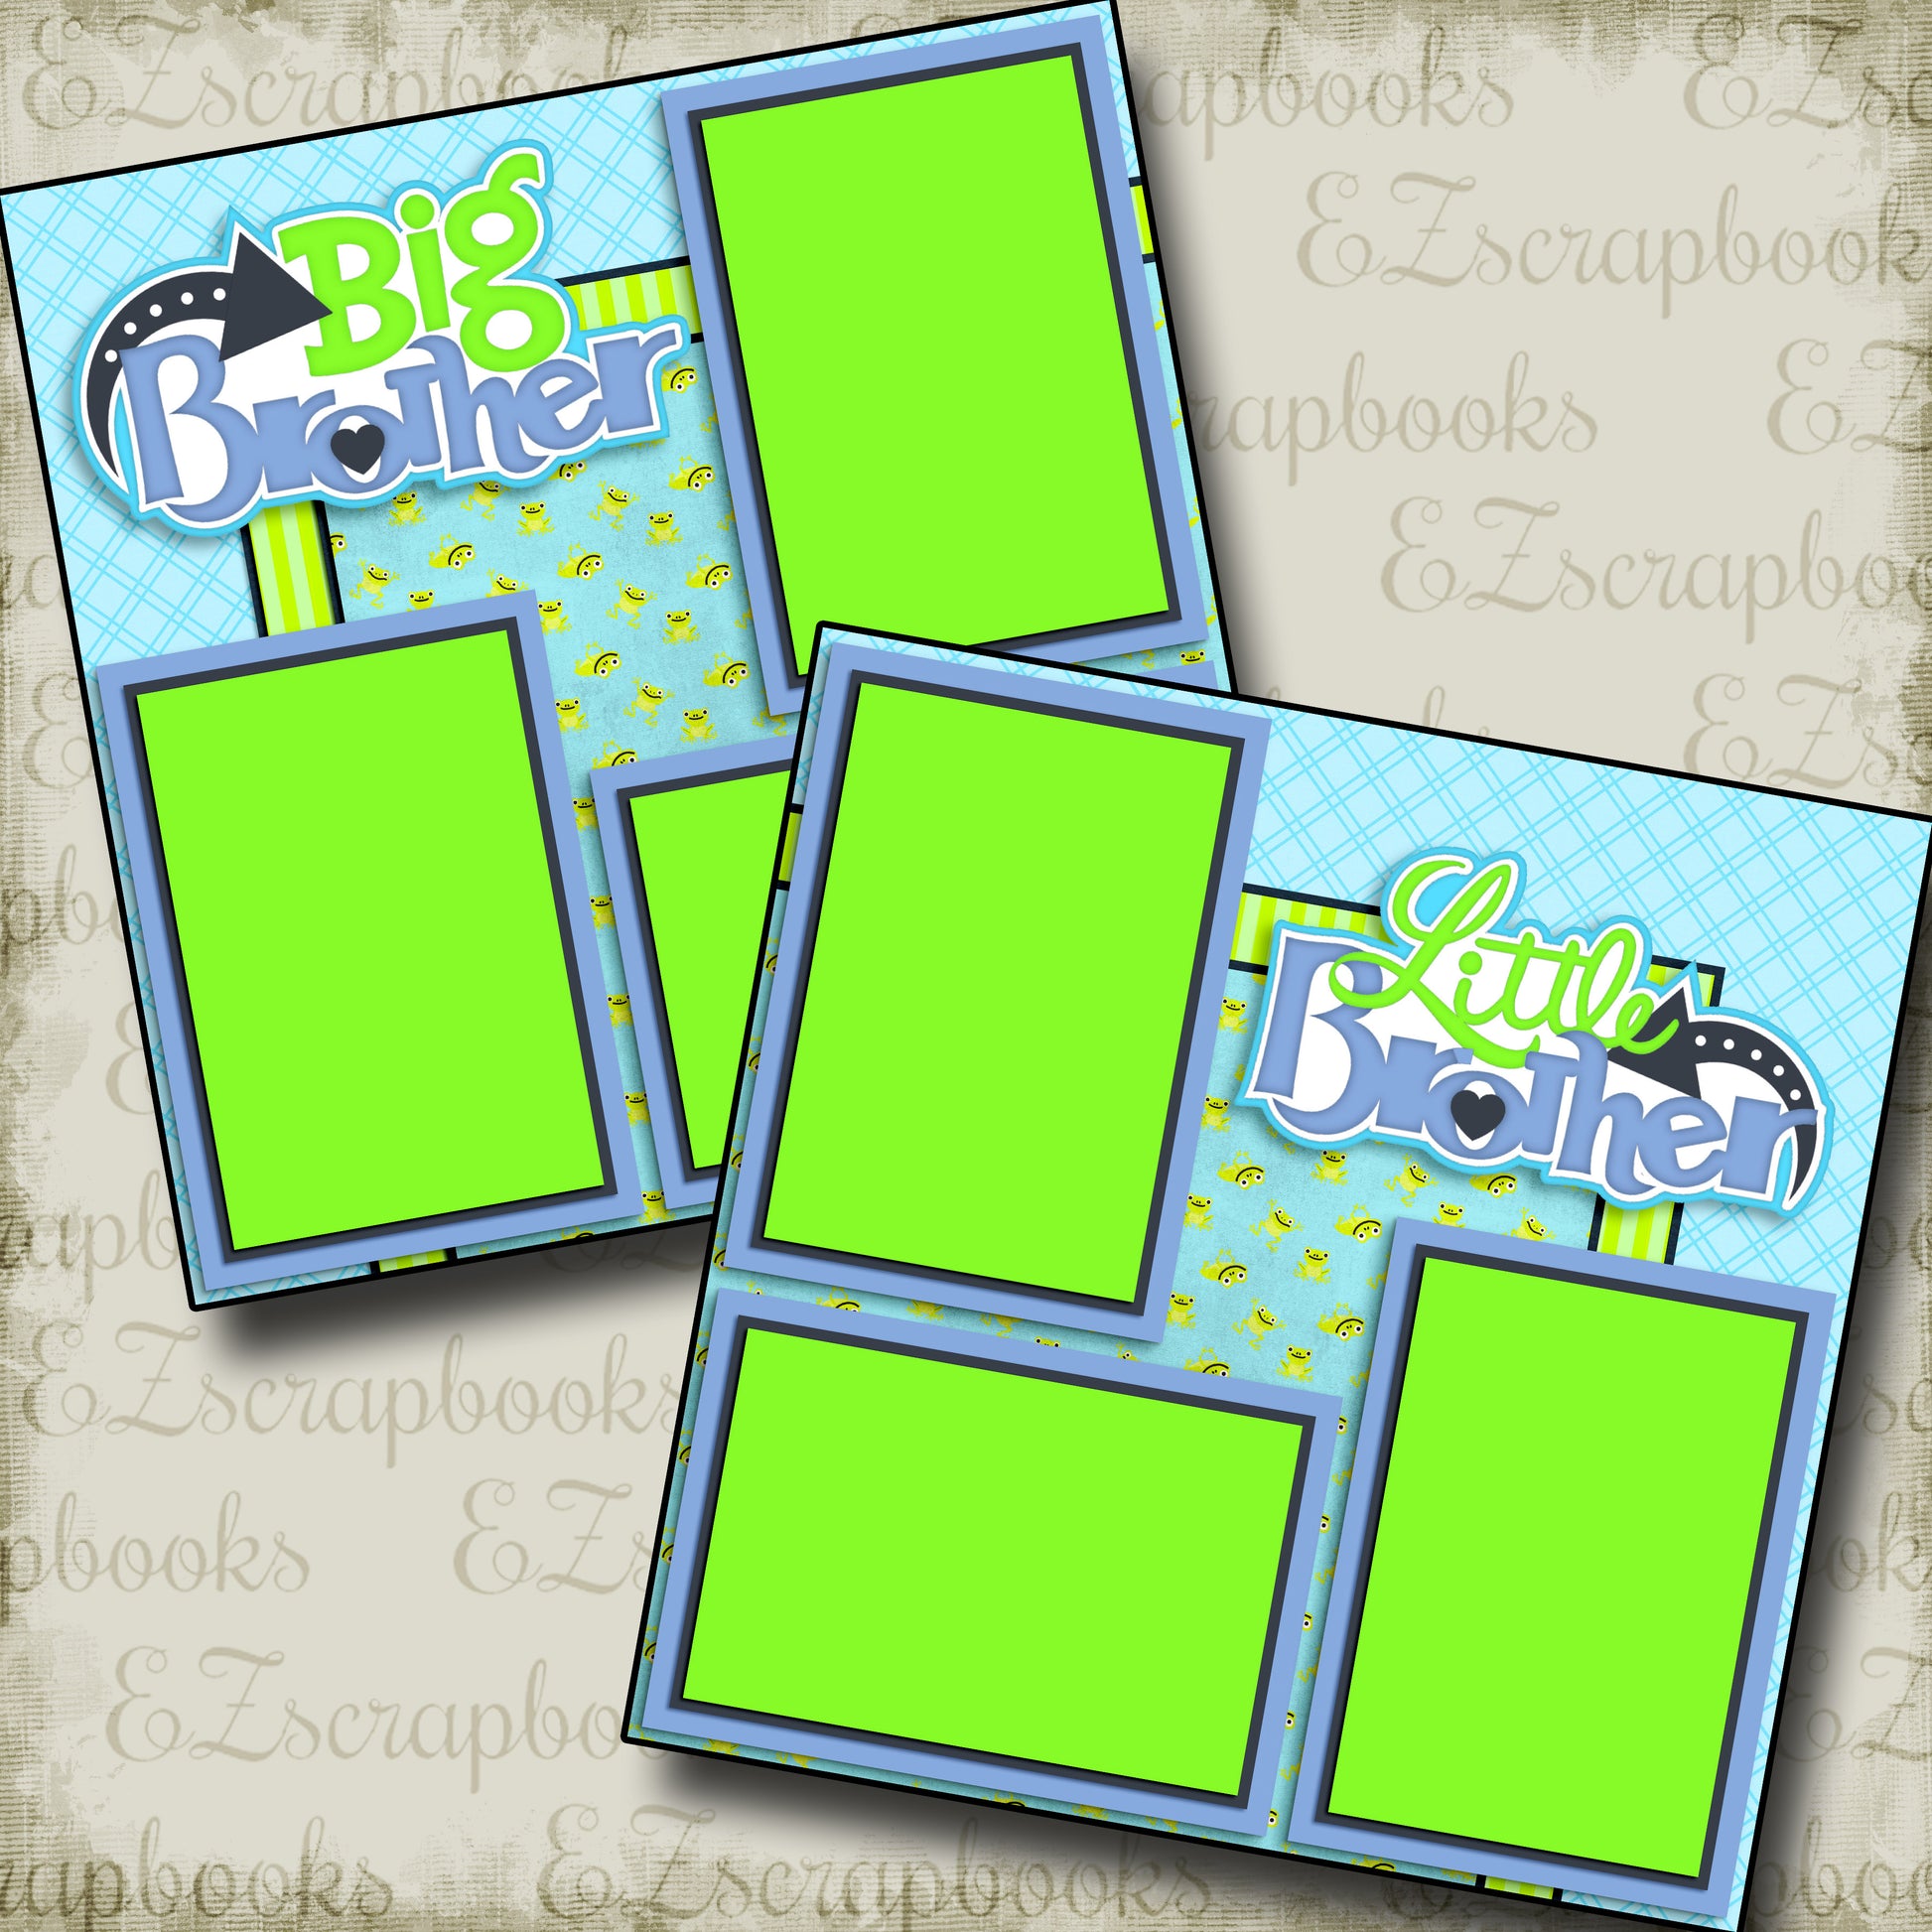 Brothers - 3138 - EZscrapbooks Scrapbook Layouts brother, Family